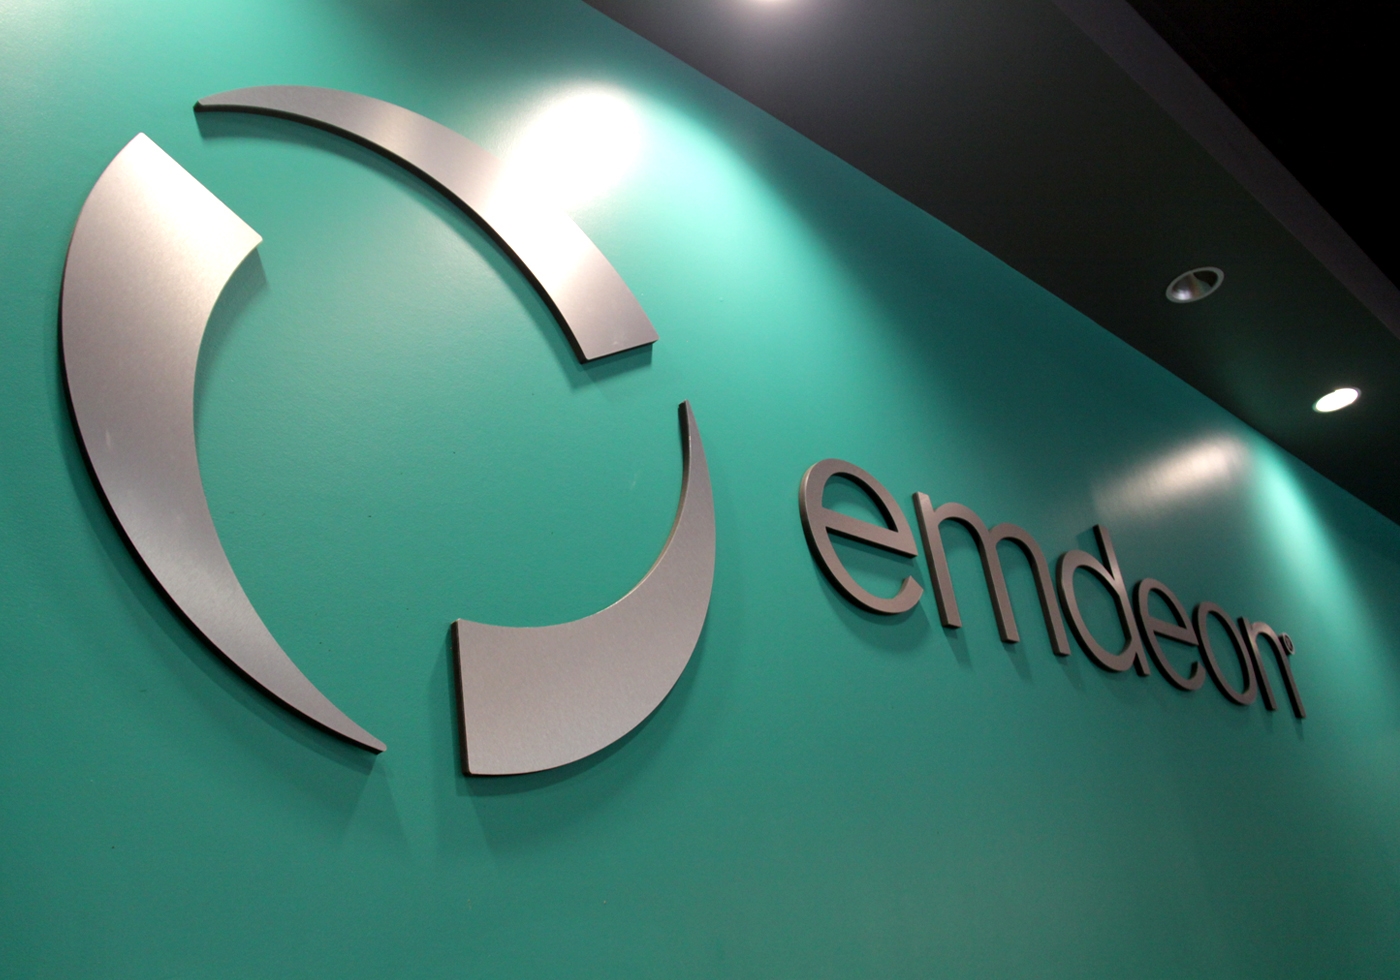 Headquartered in Nashville, TN, Emdeon is a leading provider of revenue and payment cycle management and clinical information exchange solutions, connecting payers, providers and patients in the U.S. healthcare system.